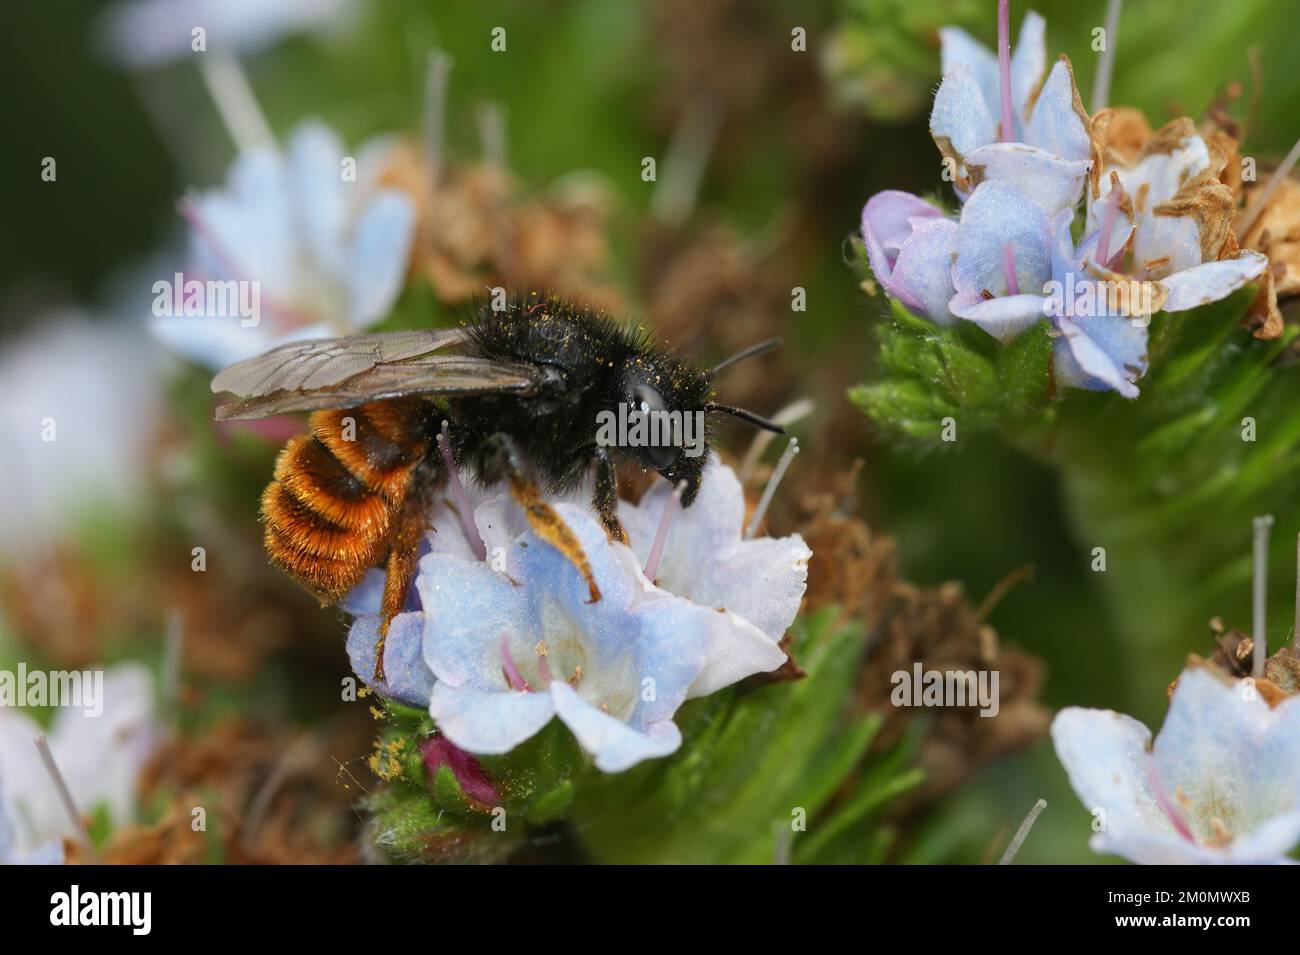 A closeup of Red tailed mason bee pollinating a white flower Stock Photo